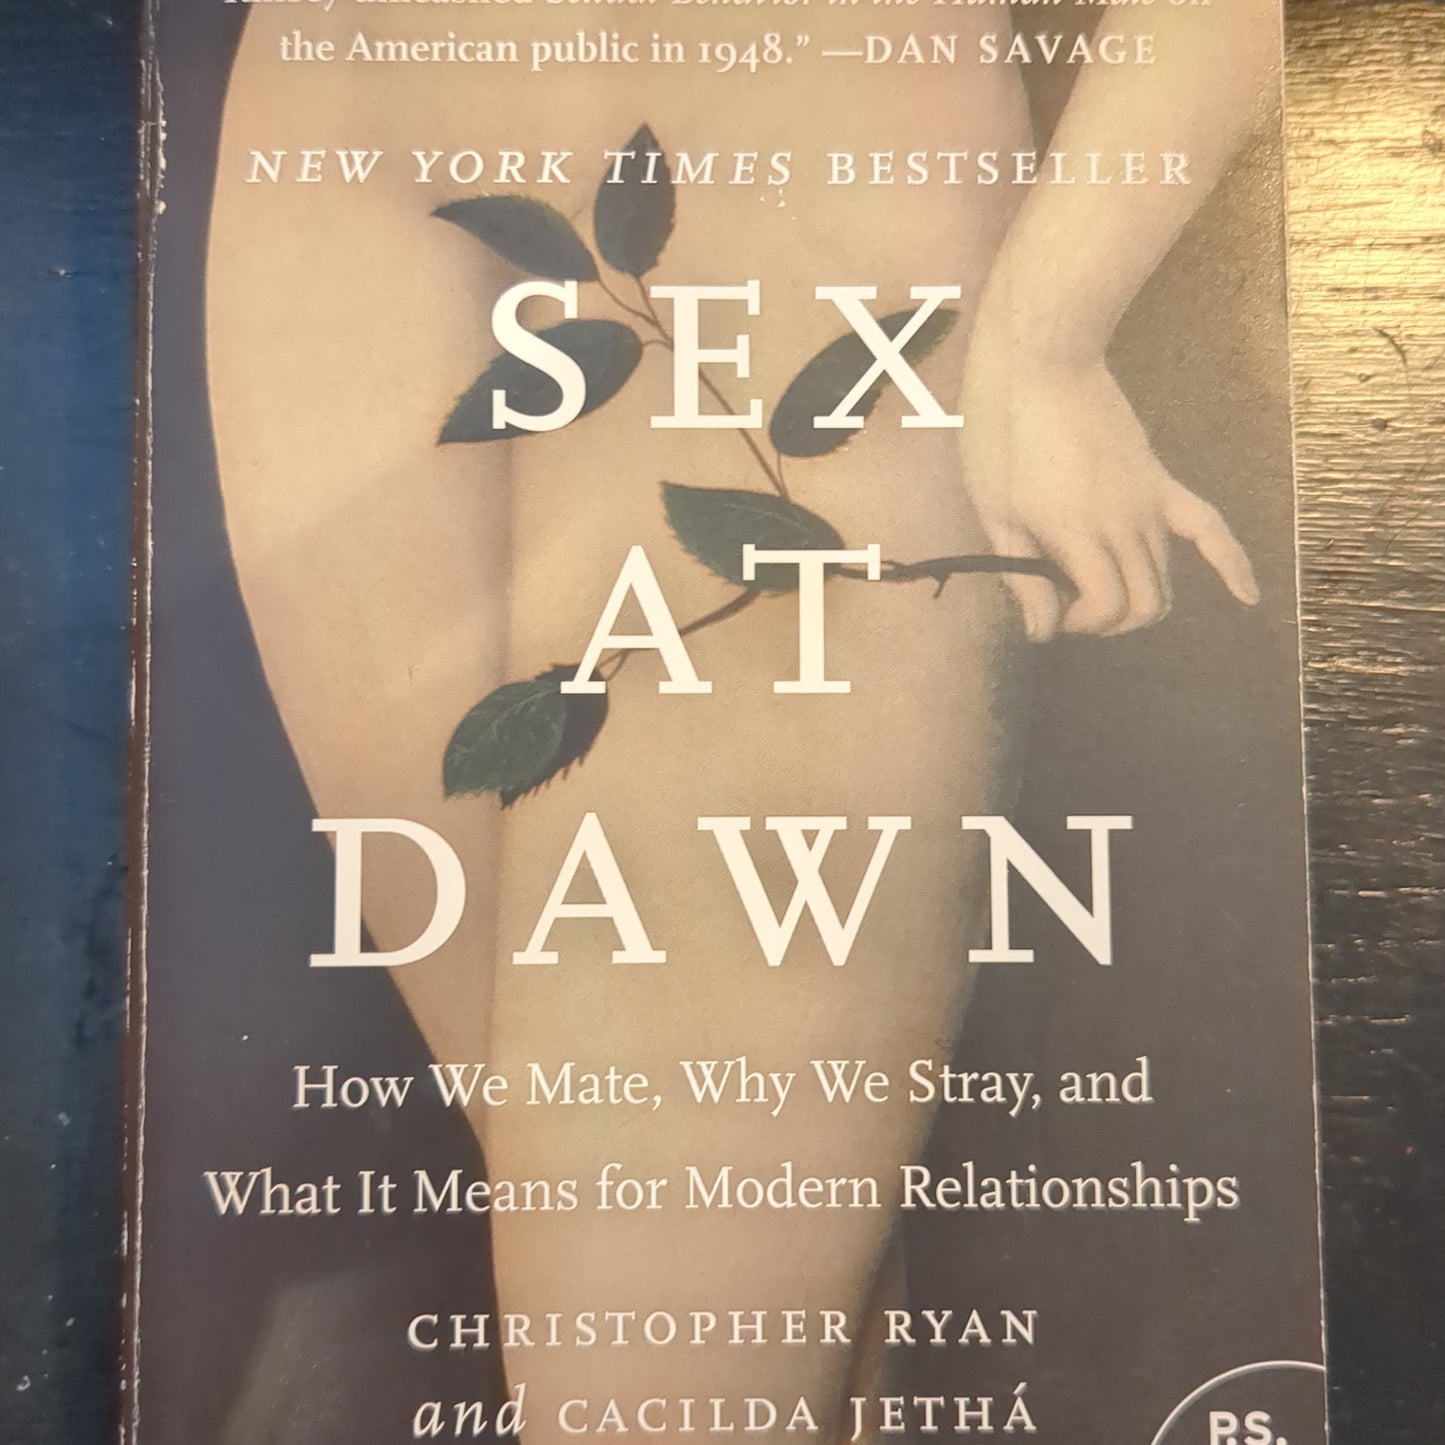 Sex at dawn how we mate, why we stray and what it means for modern relationships